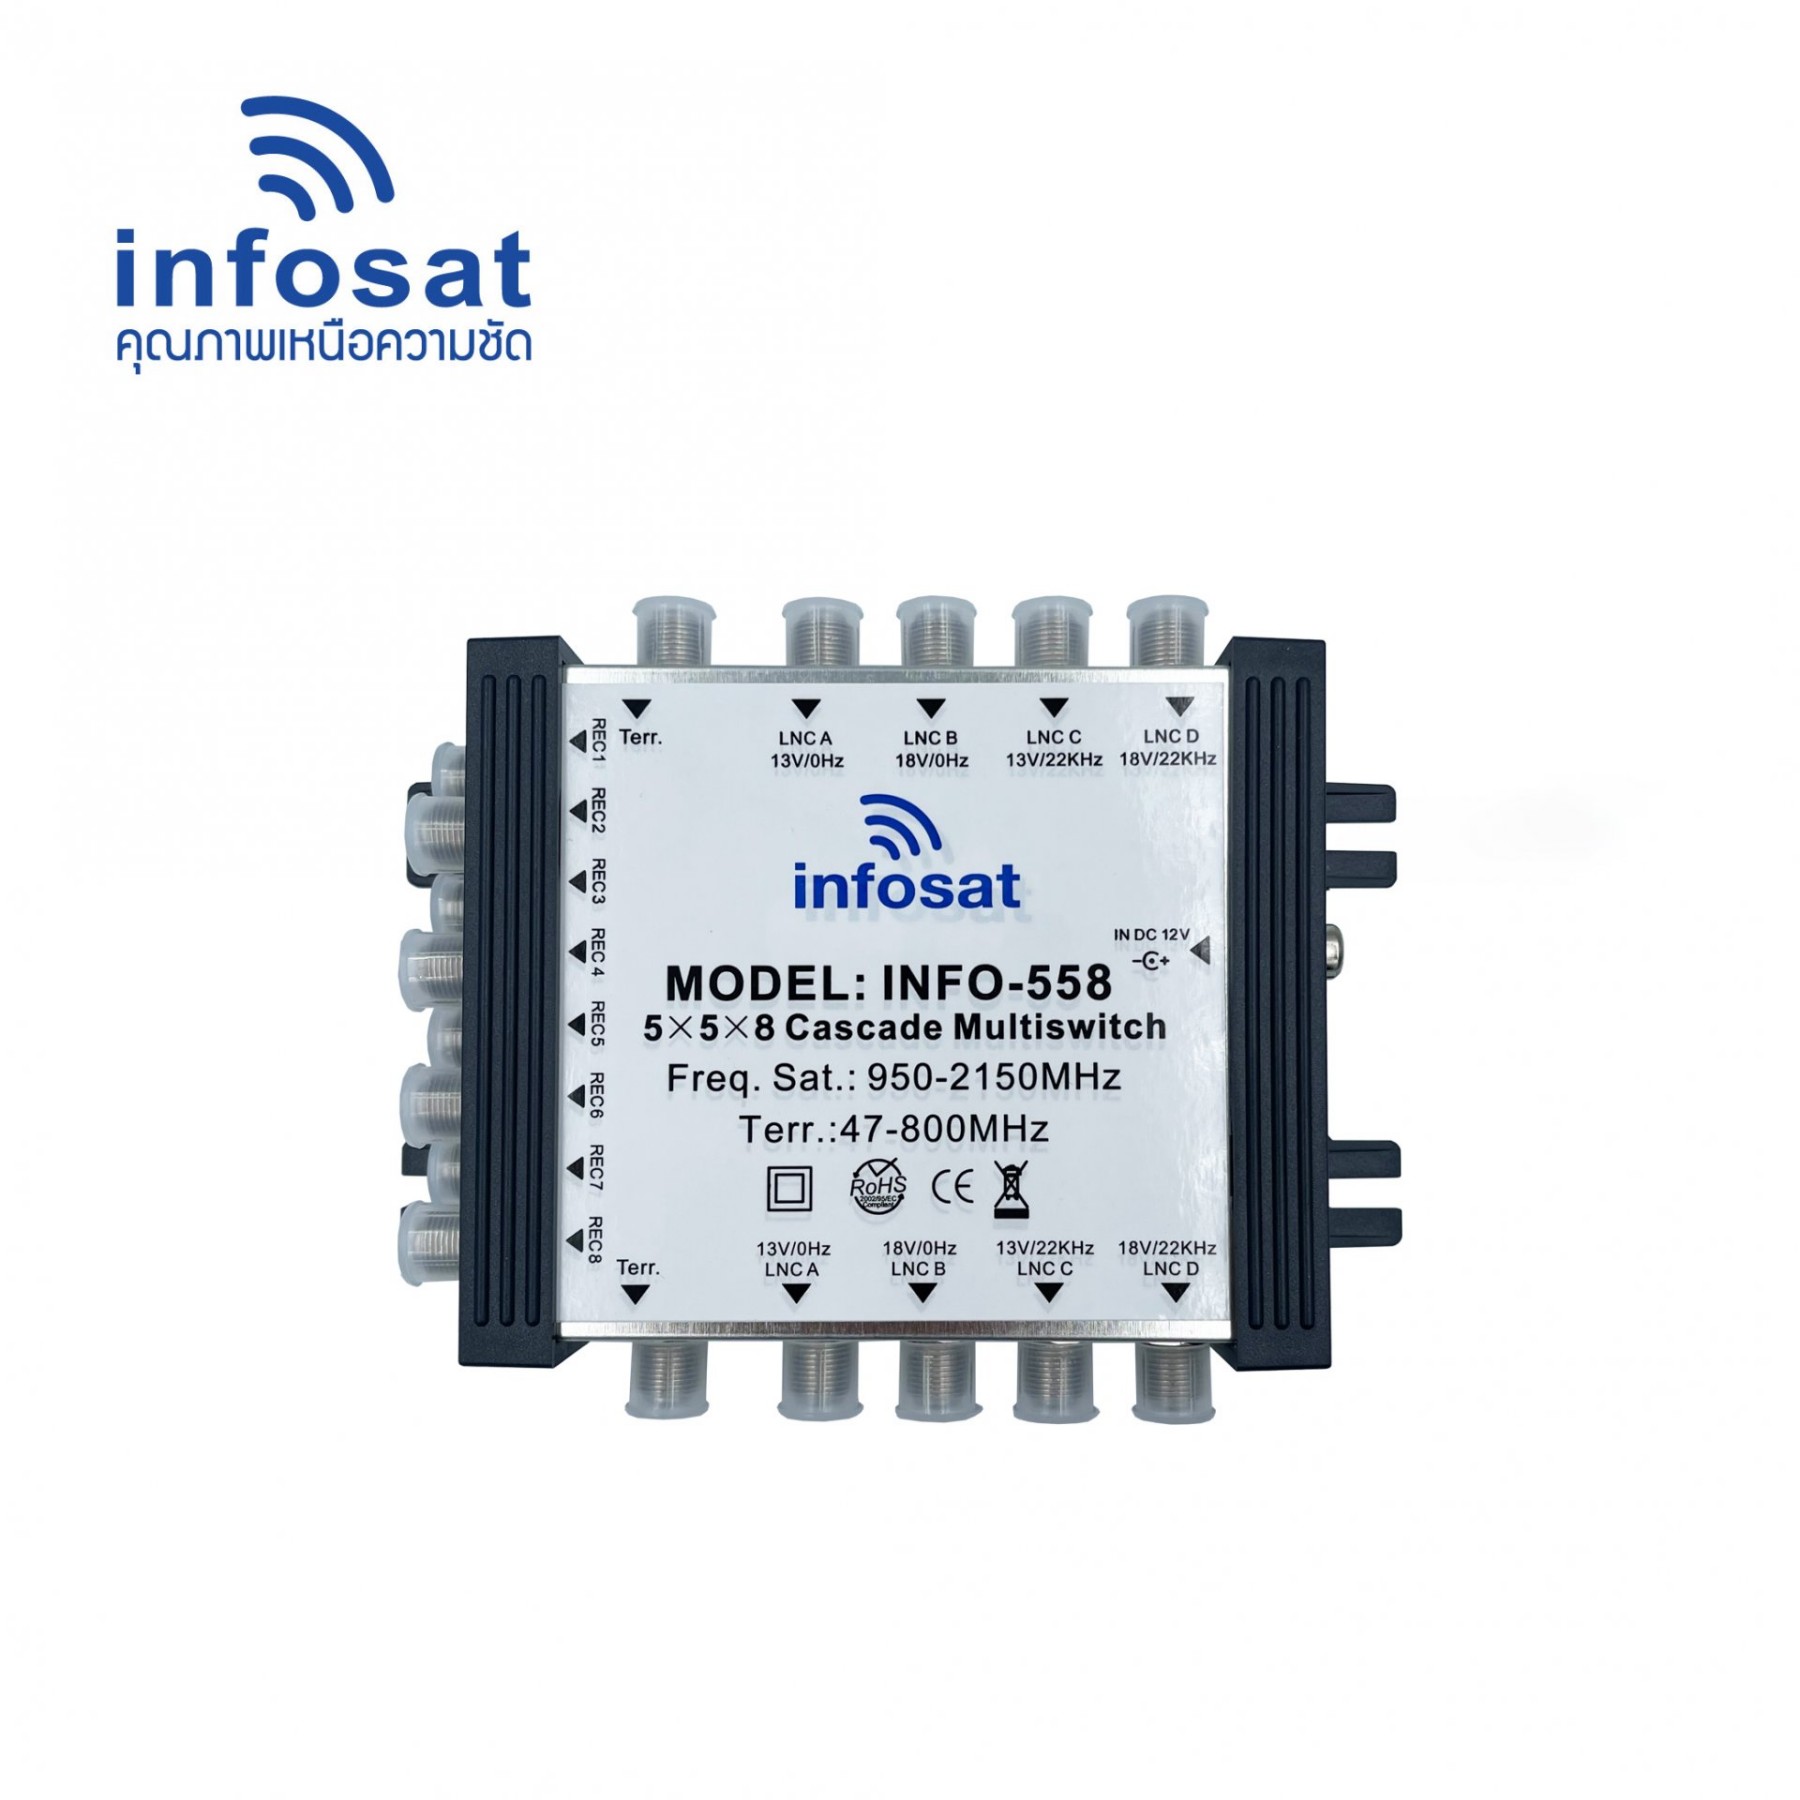 INF558 Cascade Multiswitch